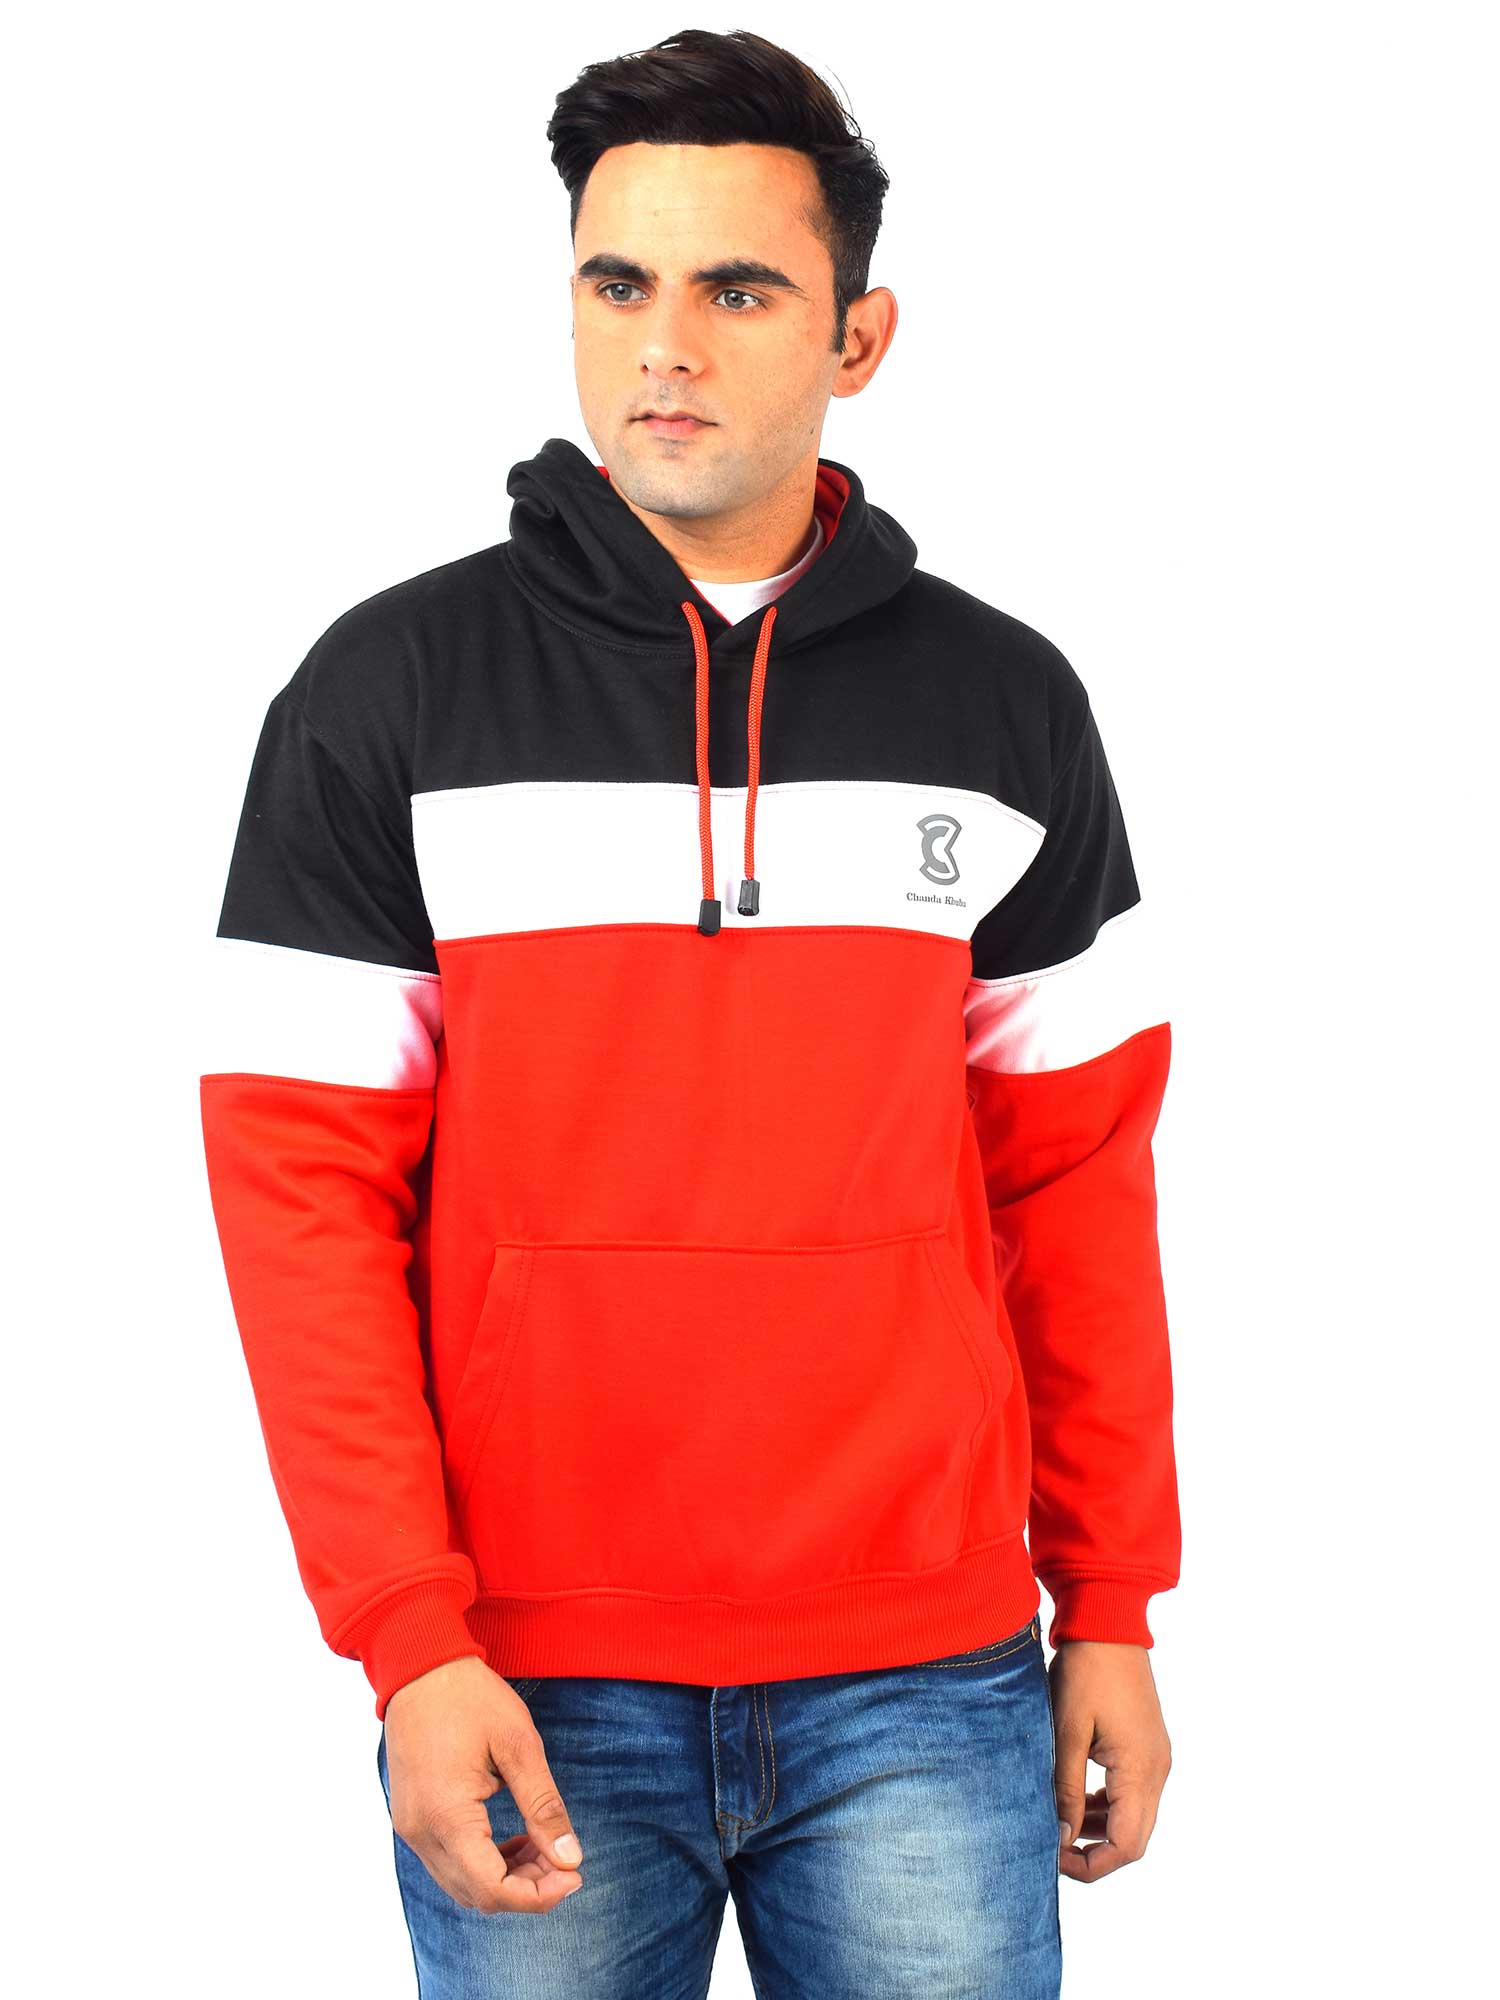 JACKETOWN Hoodies for Men Heavyweight Fleece Jackets Thick Full Zip Up  Sherpa Lined Sweatshirts M at Amazon Men's Clothing store